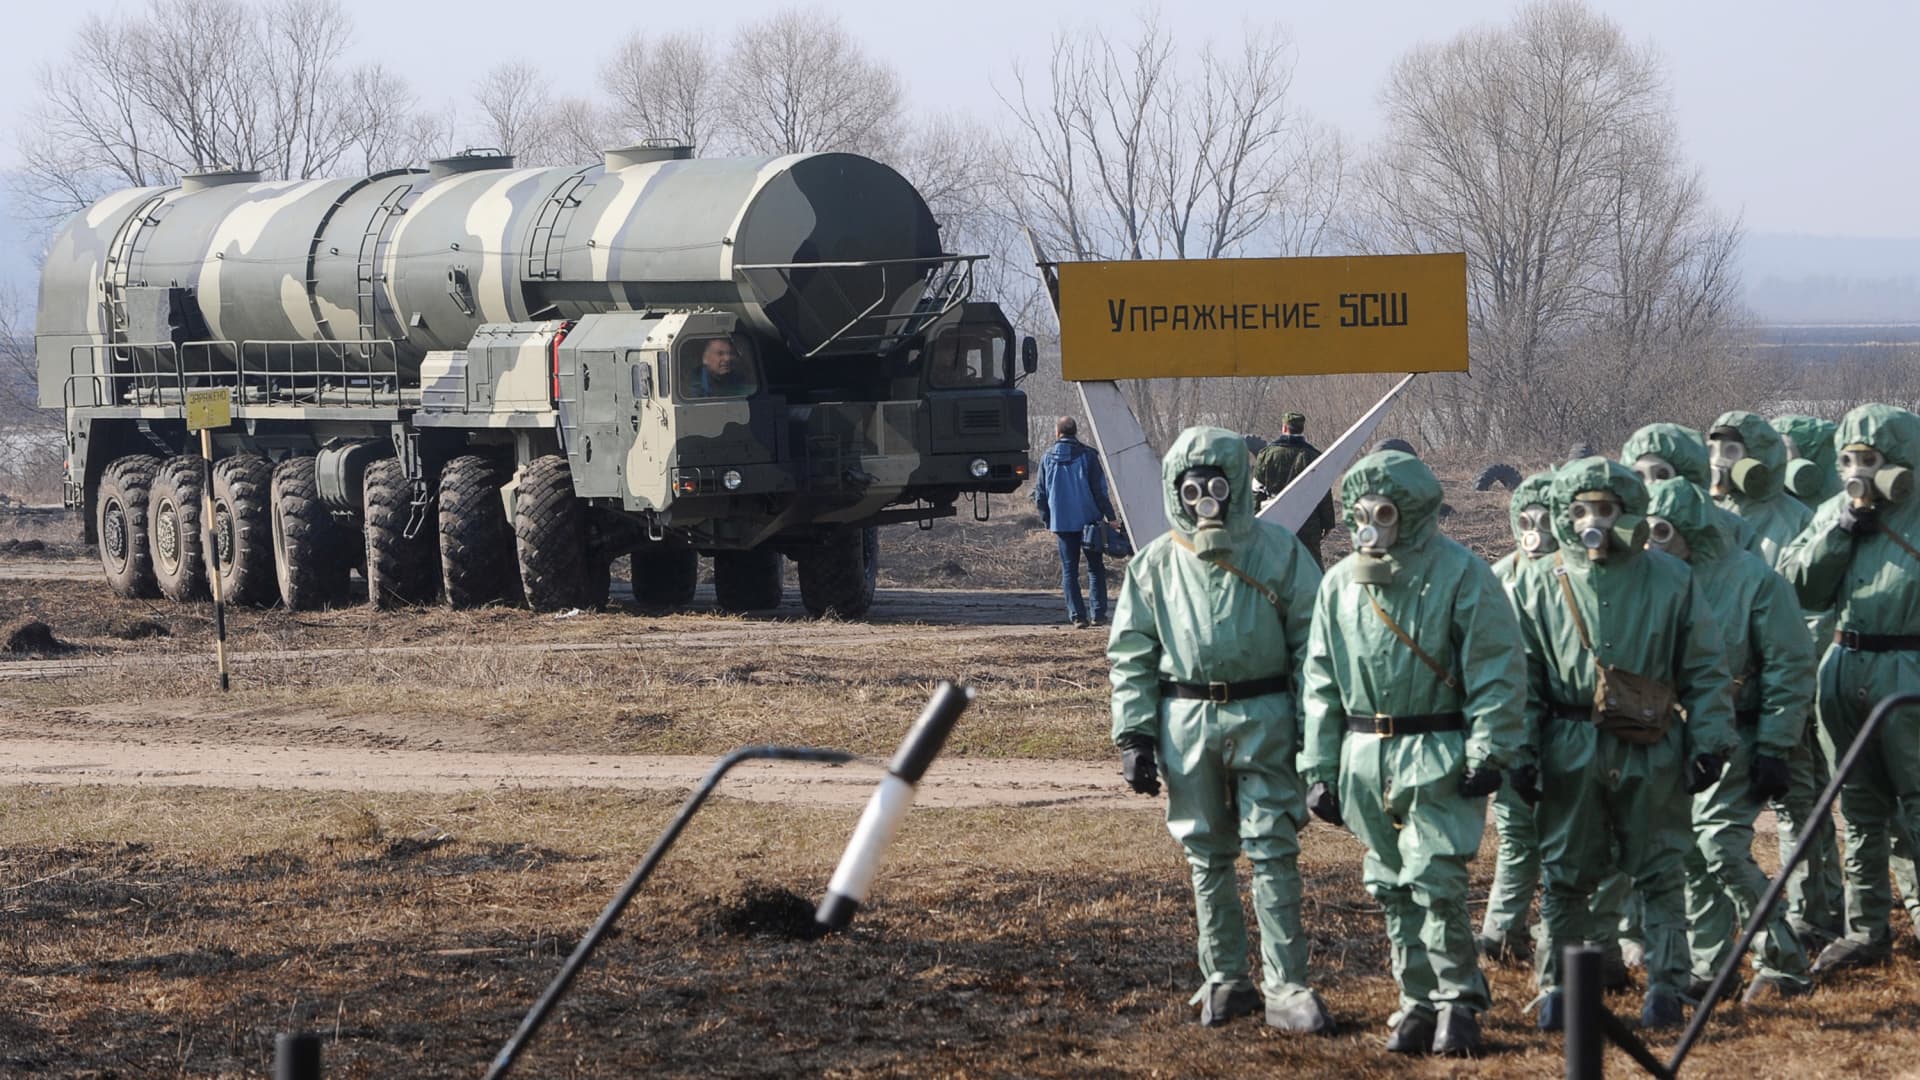 Russian soldiers wear chemical protection suits as they stand next to a military fueler on the base of a prime mover of Russian Topol intercontinental ballistic missile during a training session at the Serpukhov's military missile forces research institute some 100km outside Moscow on April 6, 2010.